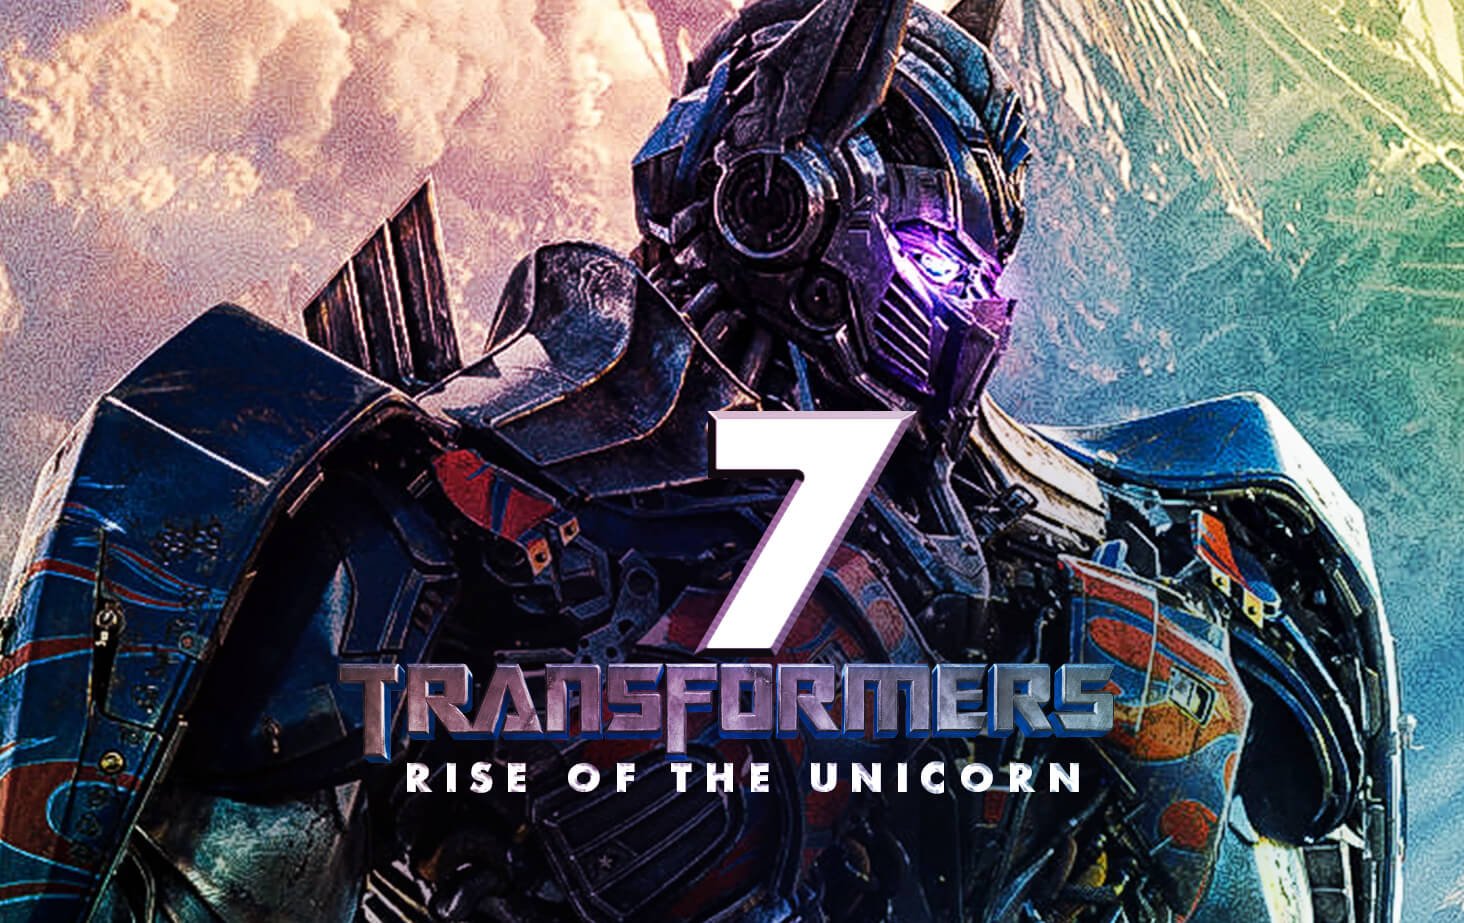 transformers 7 story